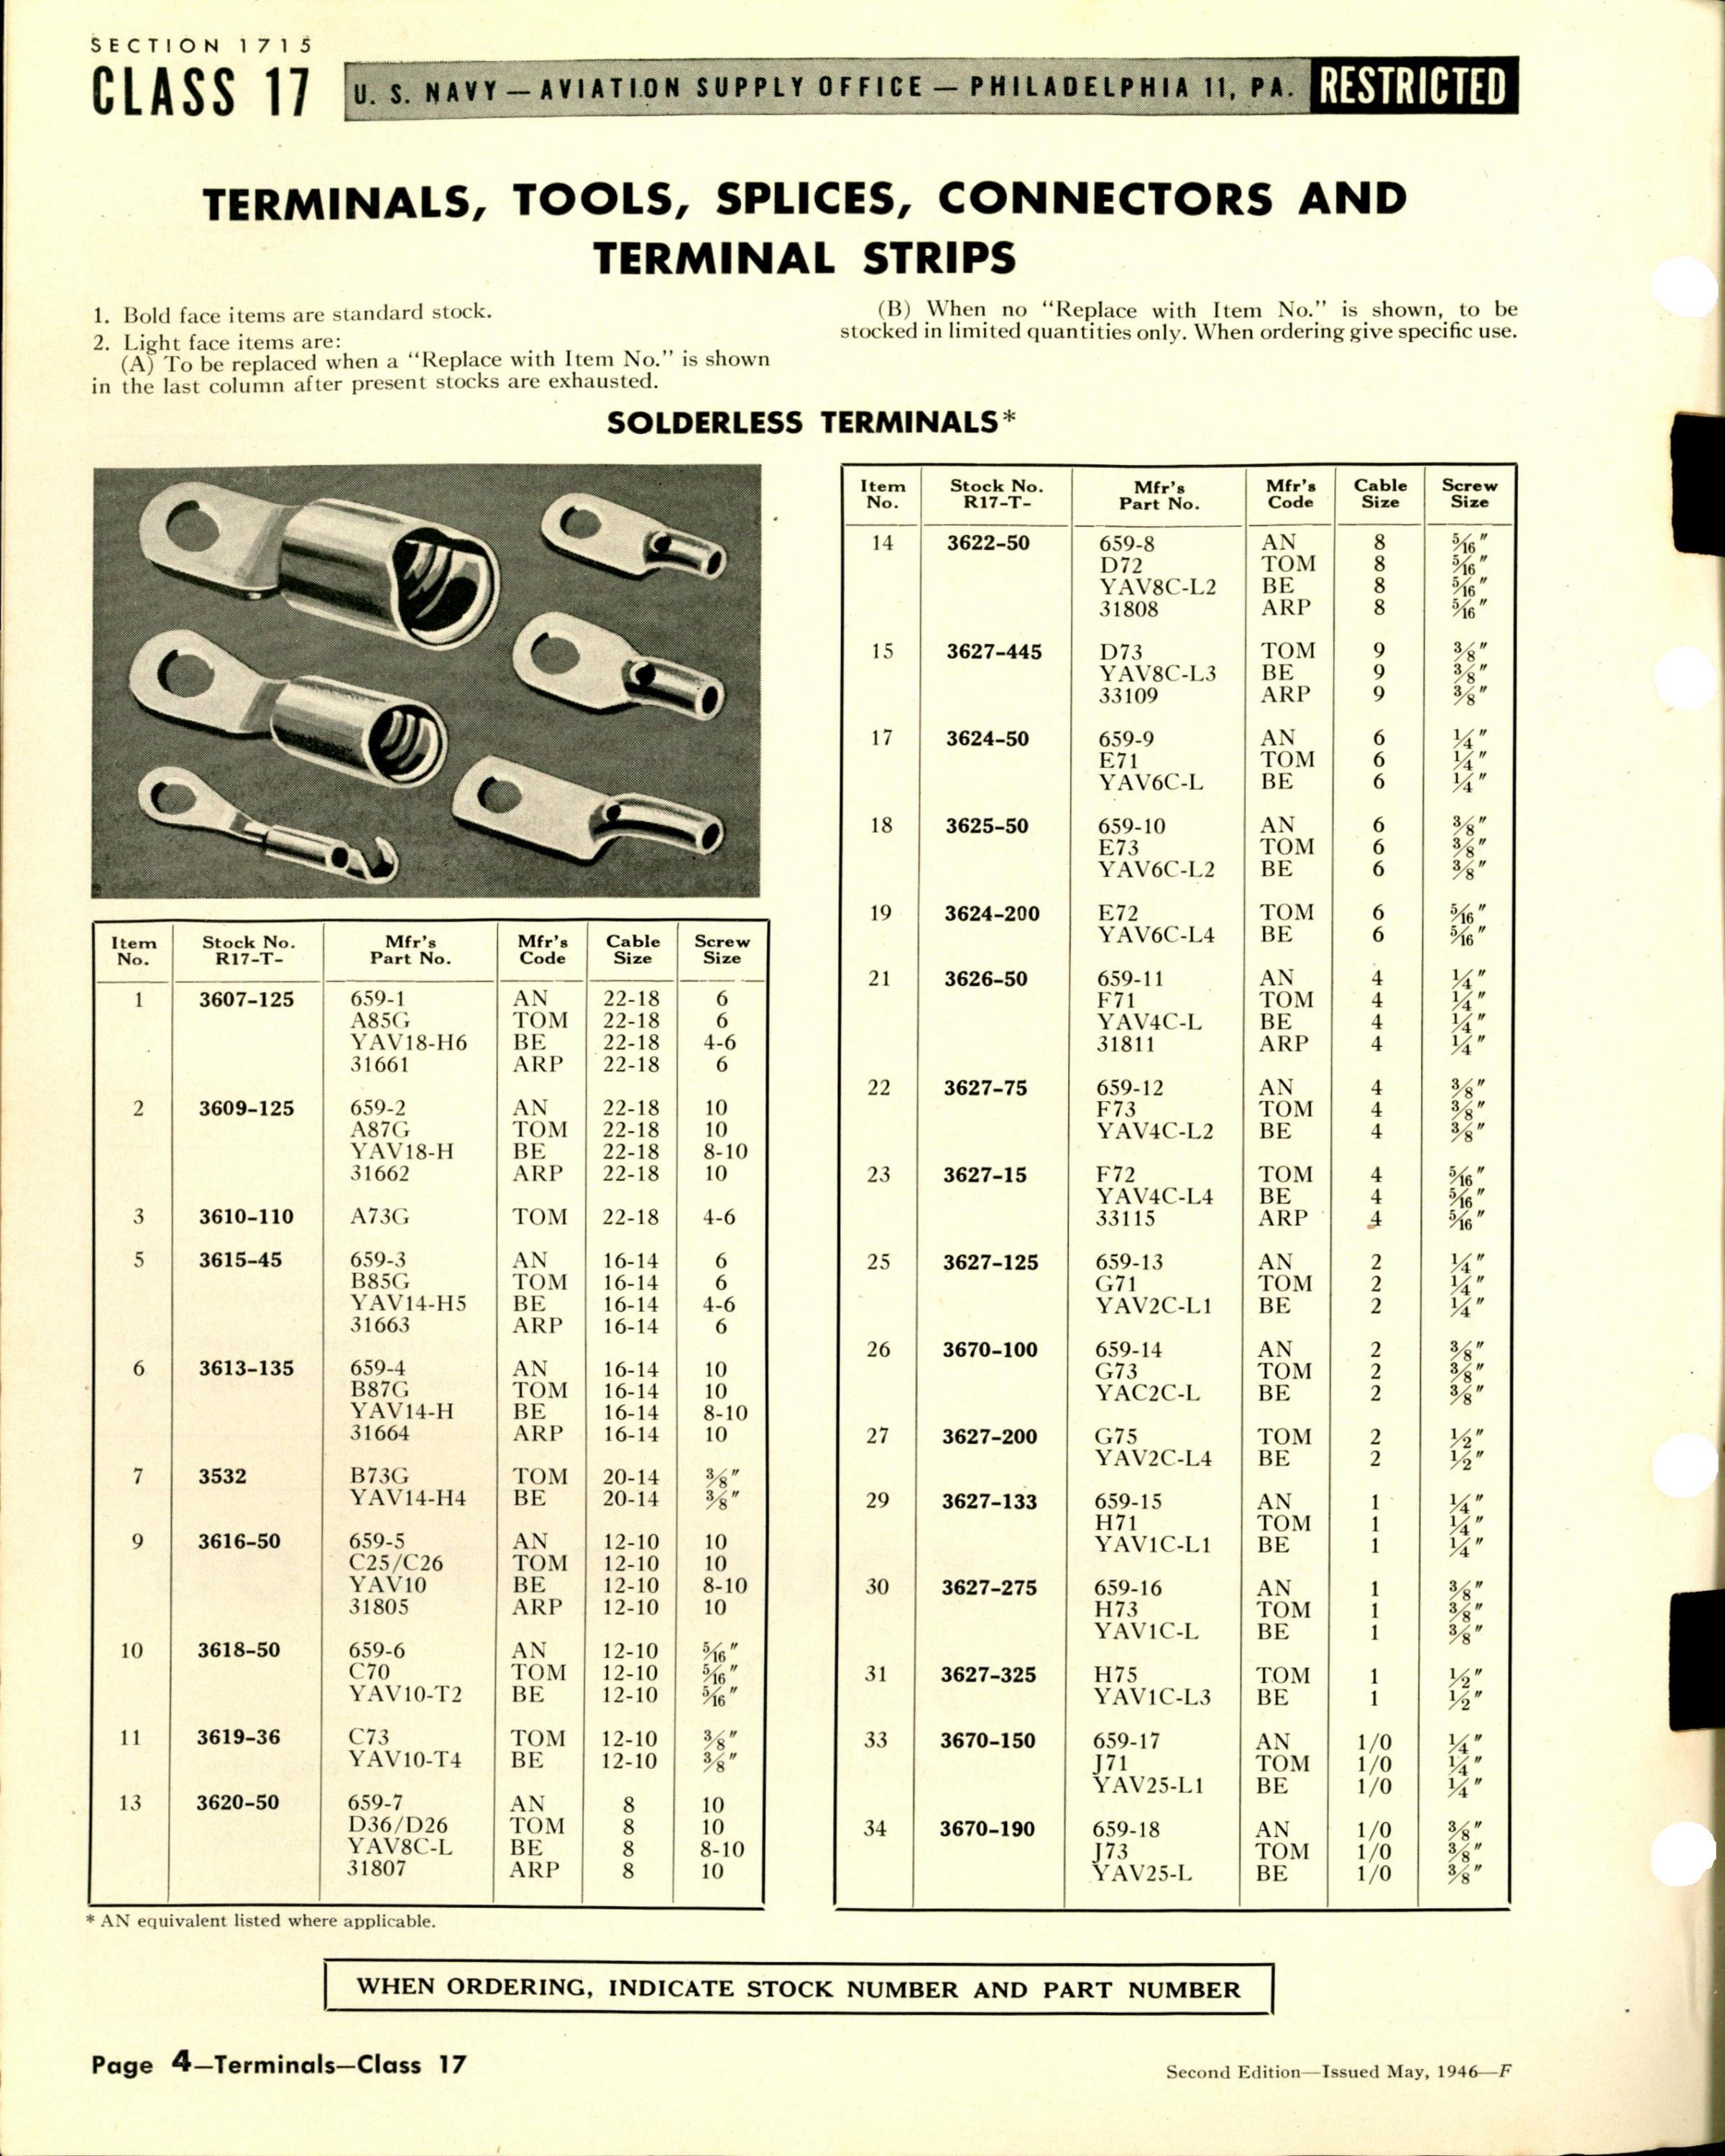 Sample page 4 from AirCorps Library document: Terminals, Tools, Splices, Connectors, & Terminal Strips